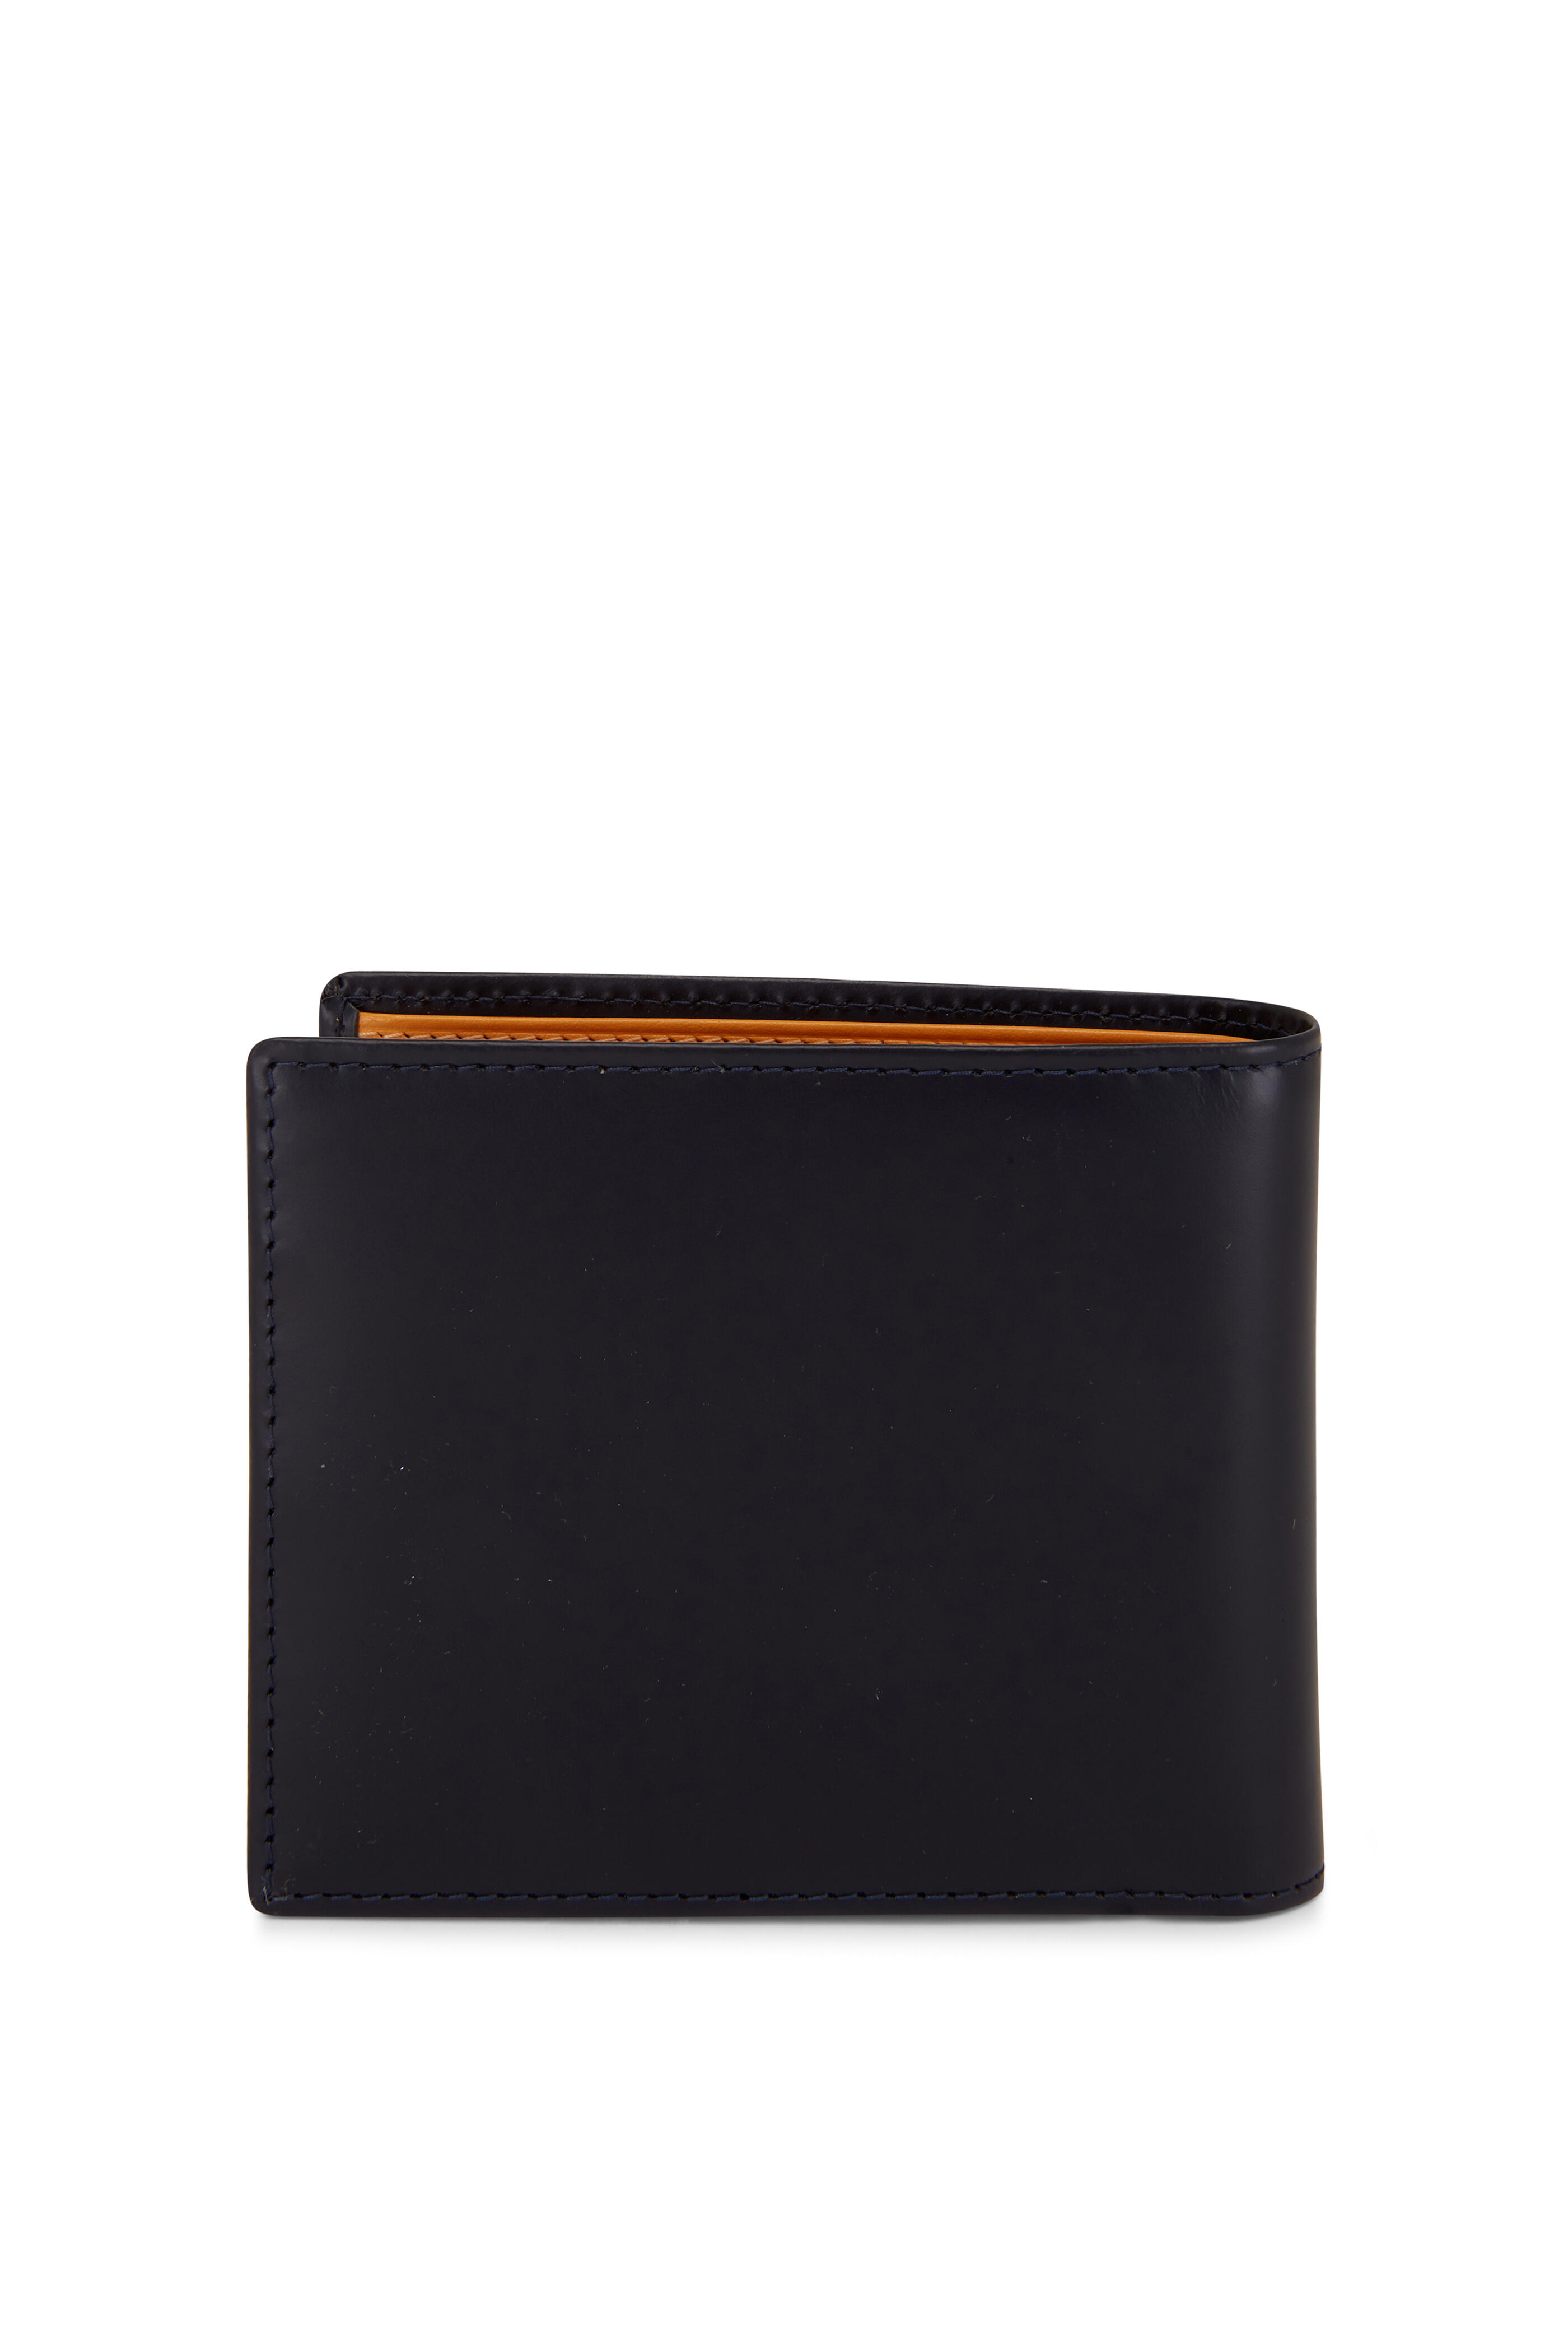 Ettinger Leather - Navy Blue Bill Fold Wallet | Mitchell Stores